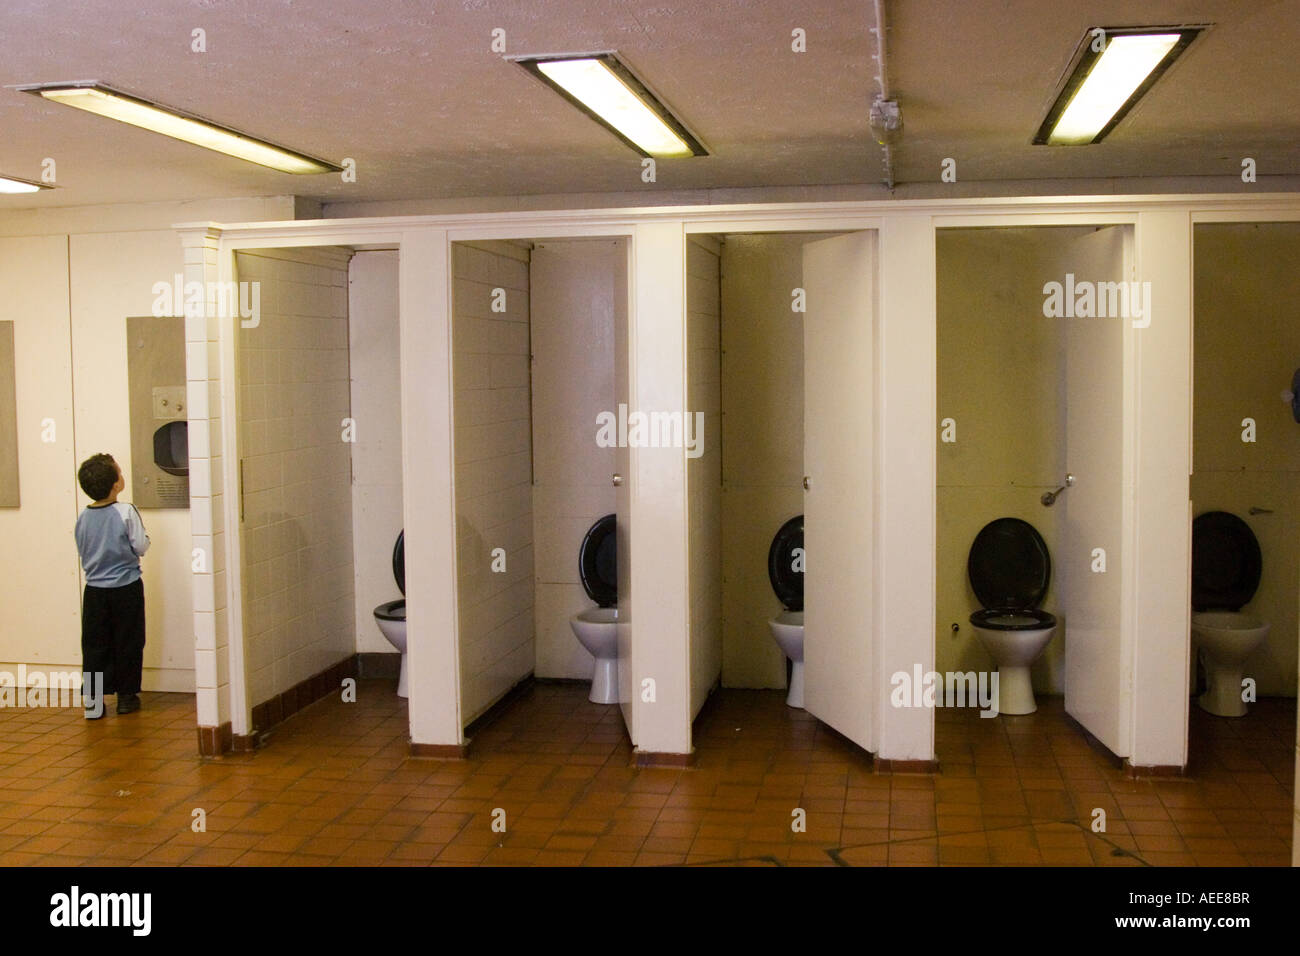 Toilet cubicles with all doors open and lids up Stock Photo